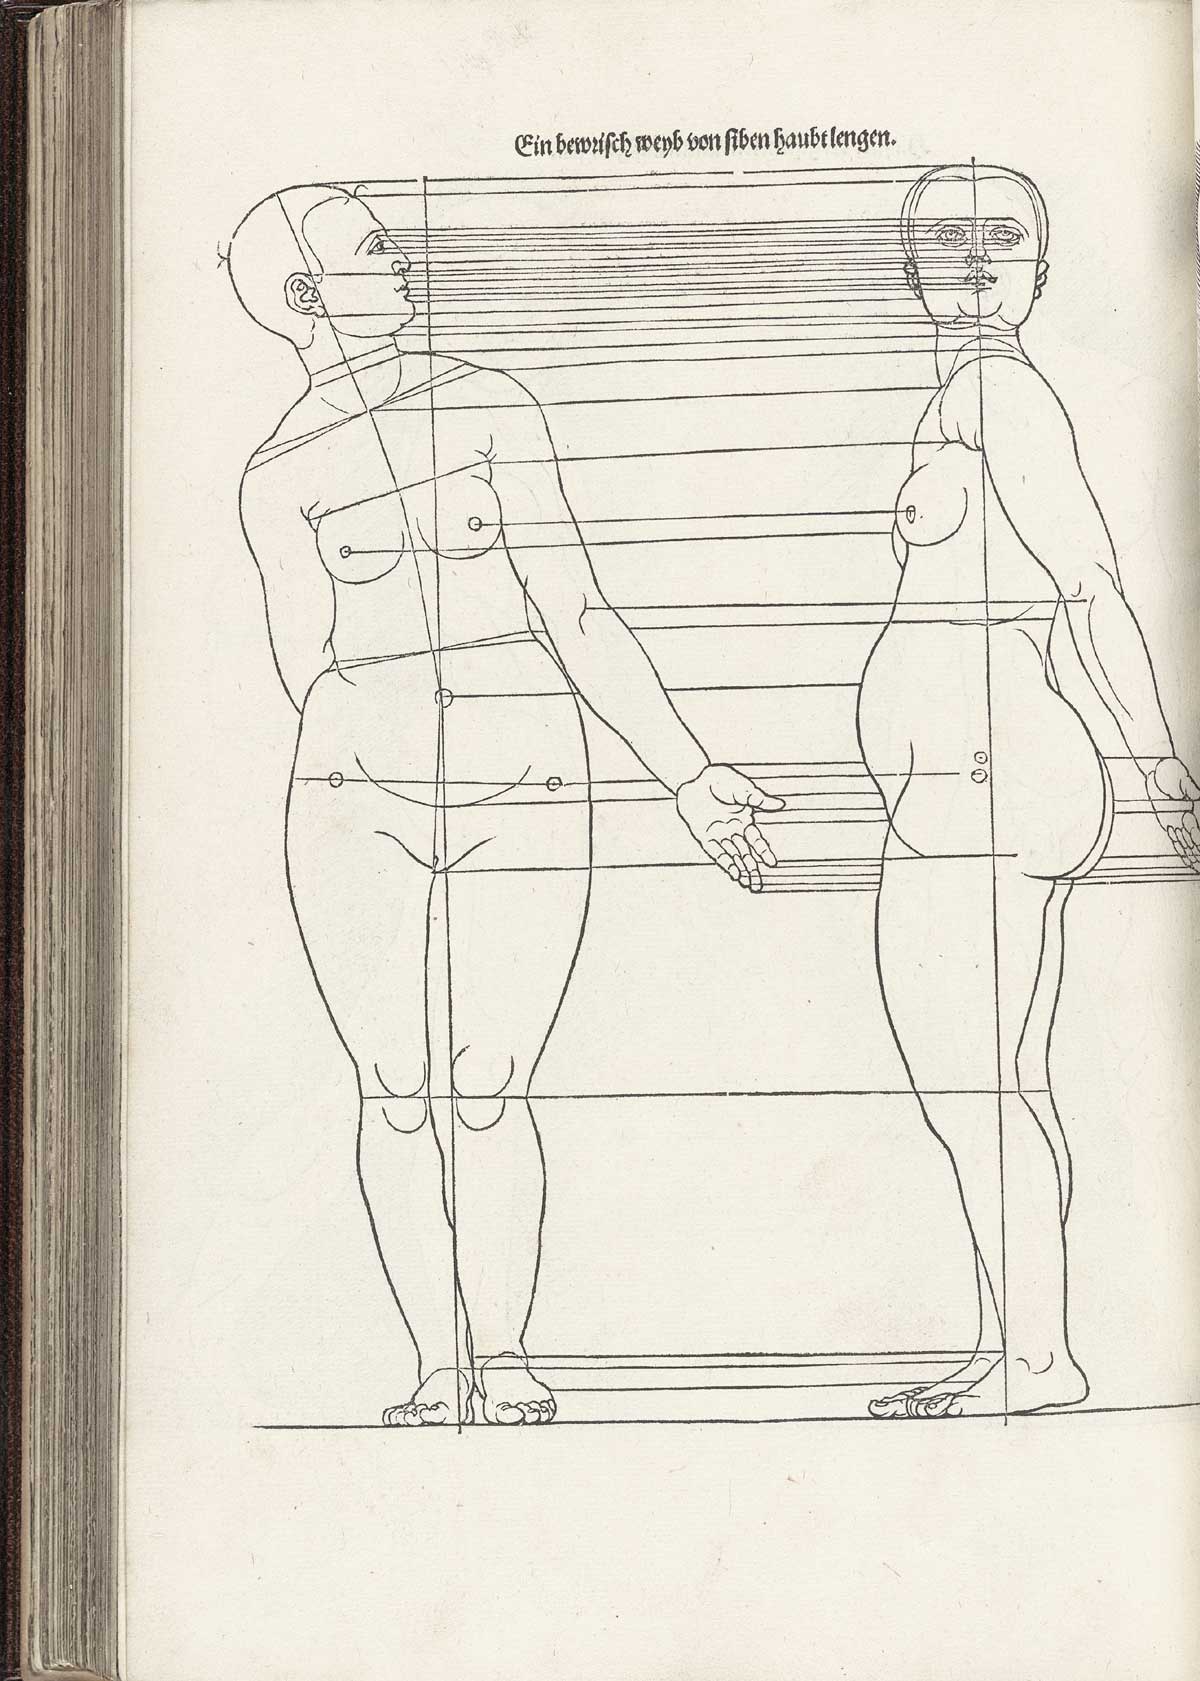 Woodcut image of two standing nude female figures bending to the left side at the waist and looking to the right, the one on the left facing the viewer and the one on the right in profile facing to the right, both with horizontal lines cutting across the figures showing proportions, for instance from the bottom of the chin to the top of the shoulder, from Albrecht Dürer’s Vier Bücher von menschlicher Proportion, NLM Call no. WZ 240 D853v 1528.